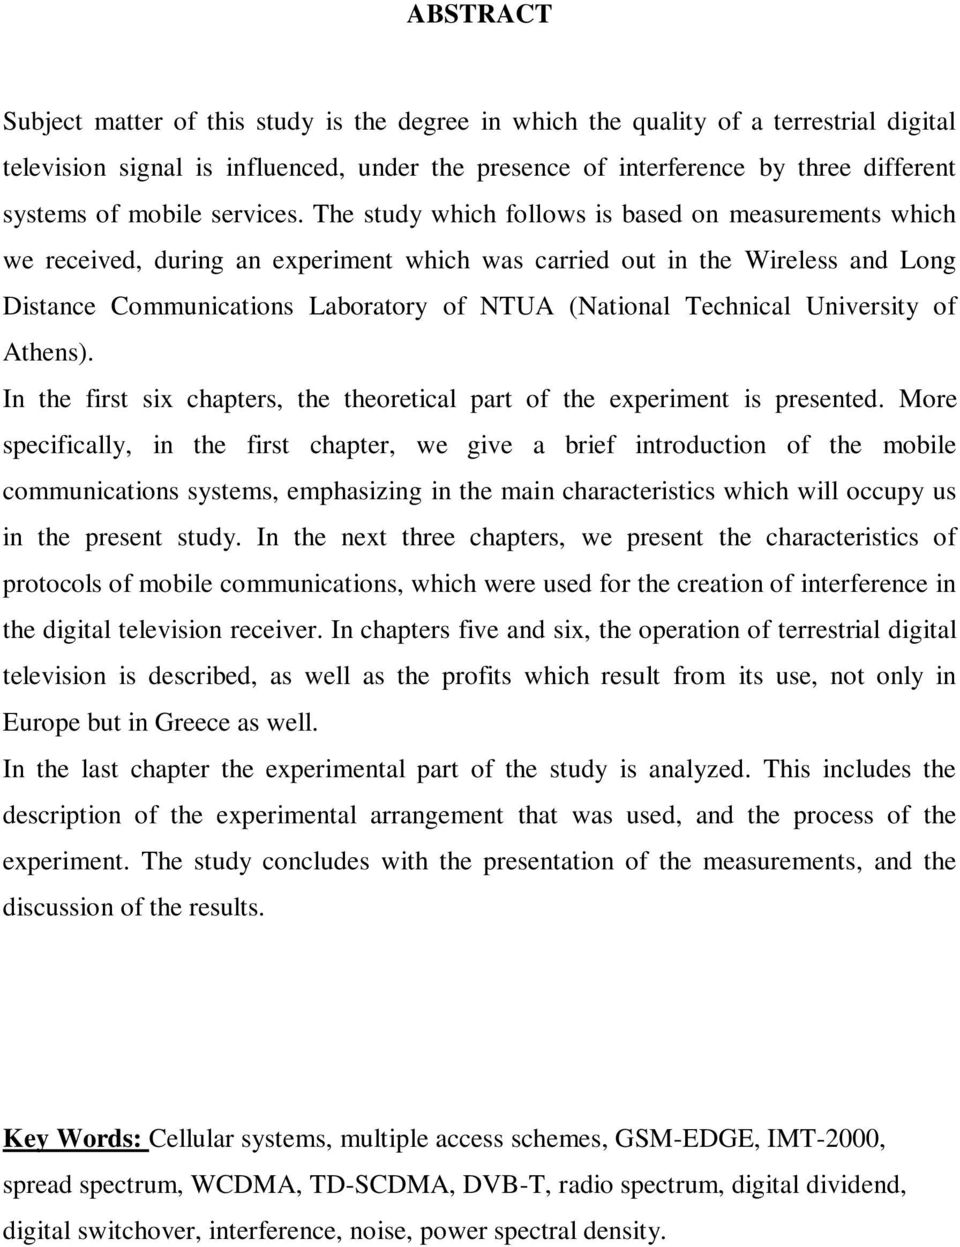 The study which follows is based on measurements which we received, during an experiment which was carried out in the Wireless and Long Distance Communications Laboratory of NTUA (National Technical